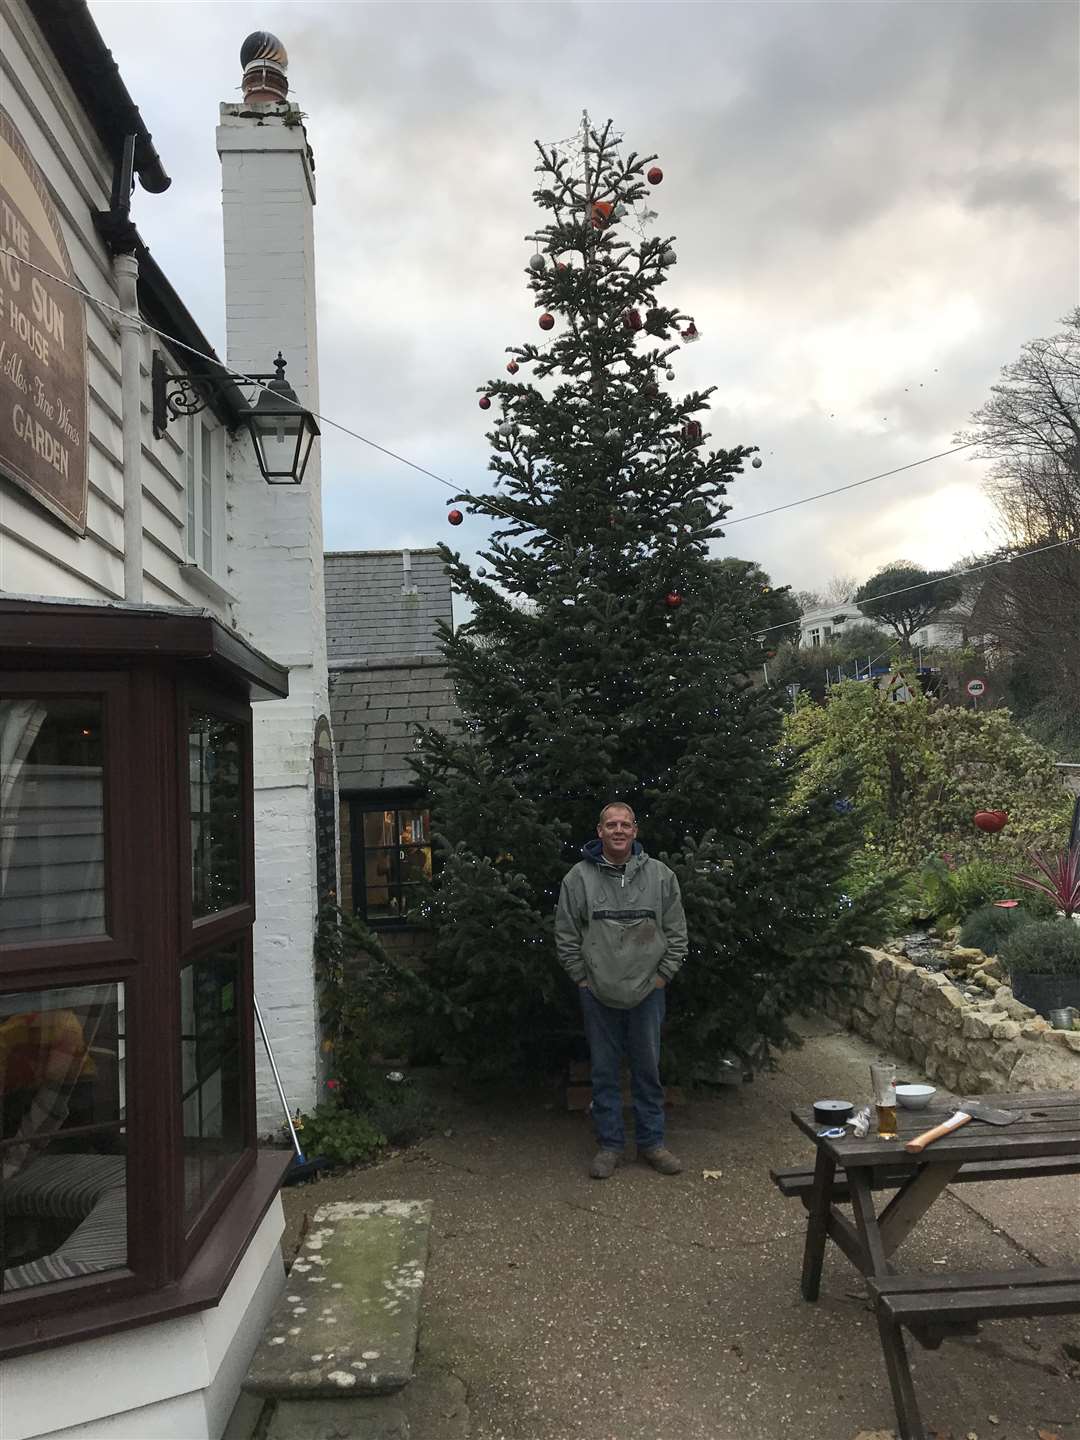 Dan Johnson with the 24ft tree outside The Rising Sun pub in Kingsdown